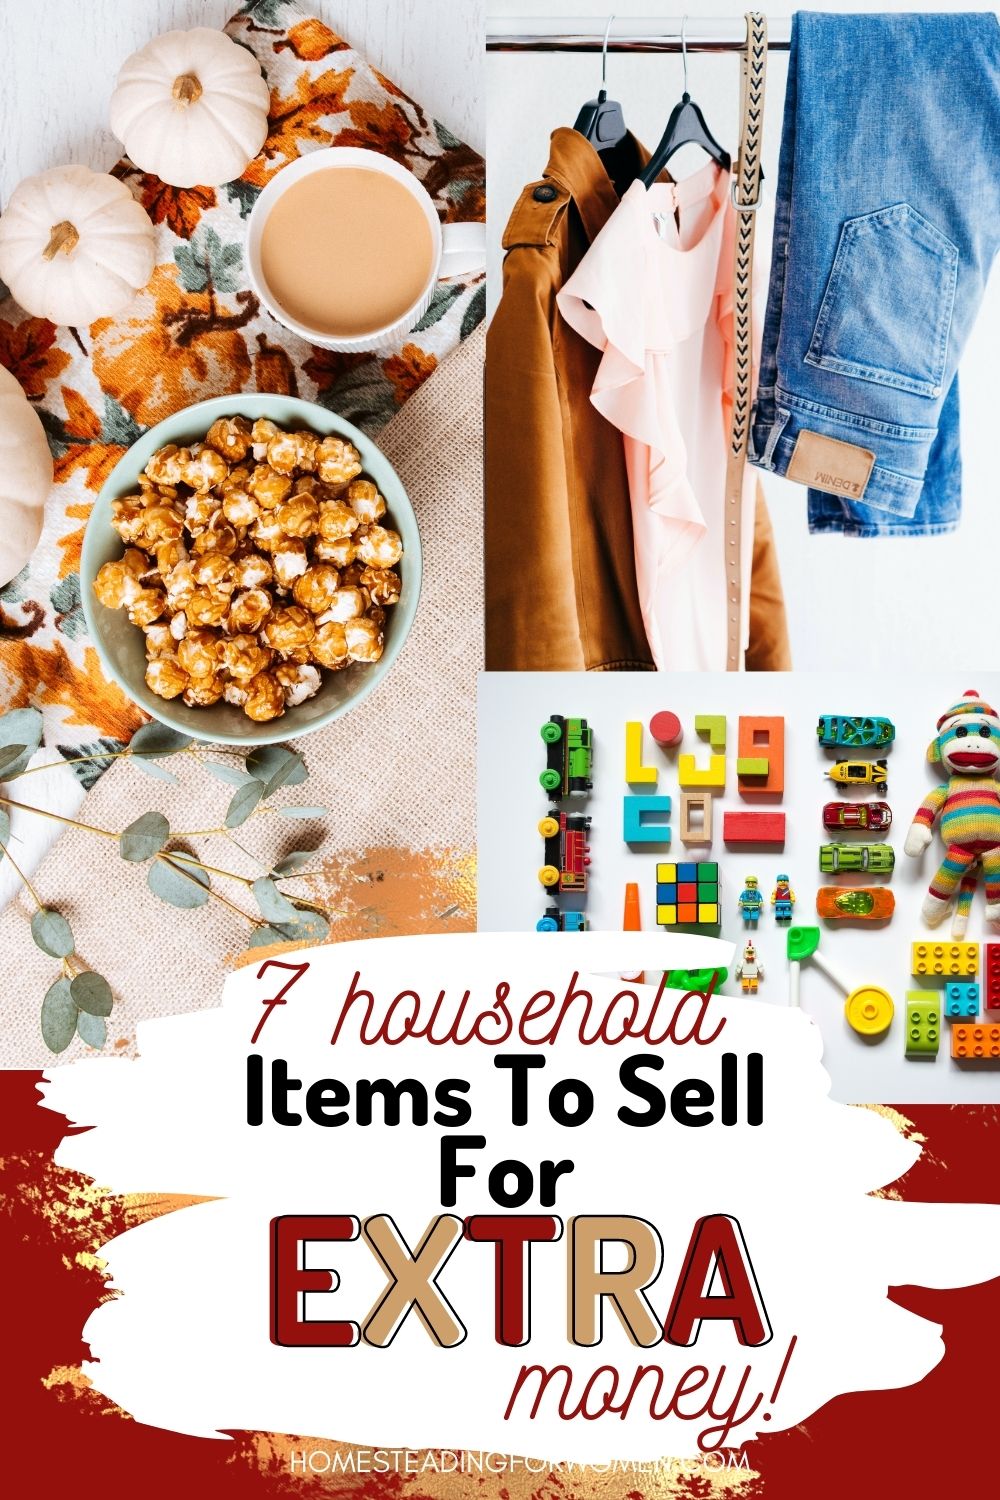 Household Items To sell